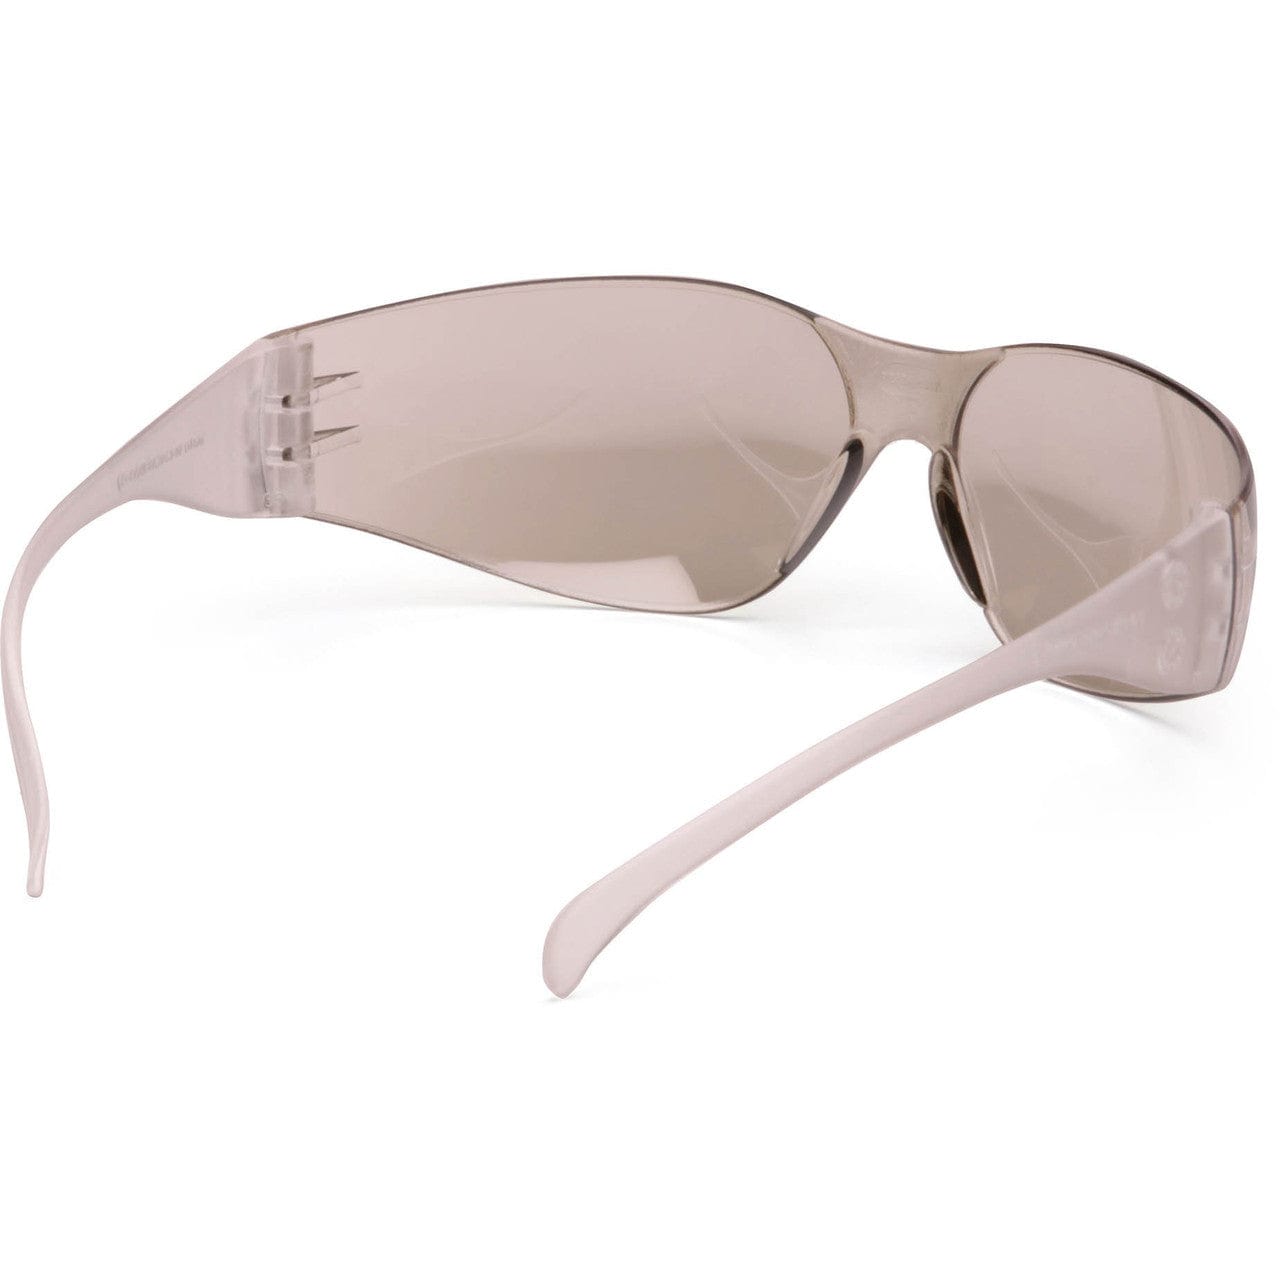 Pyramex Intruder Safety Glasses with Indoor/Outdoor Lens